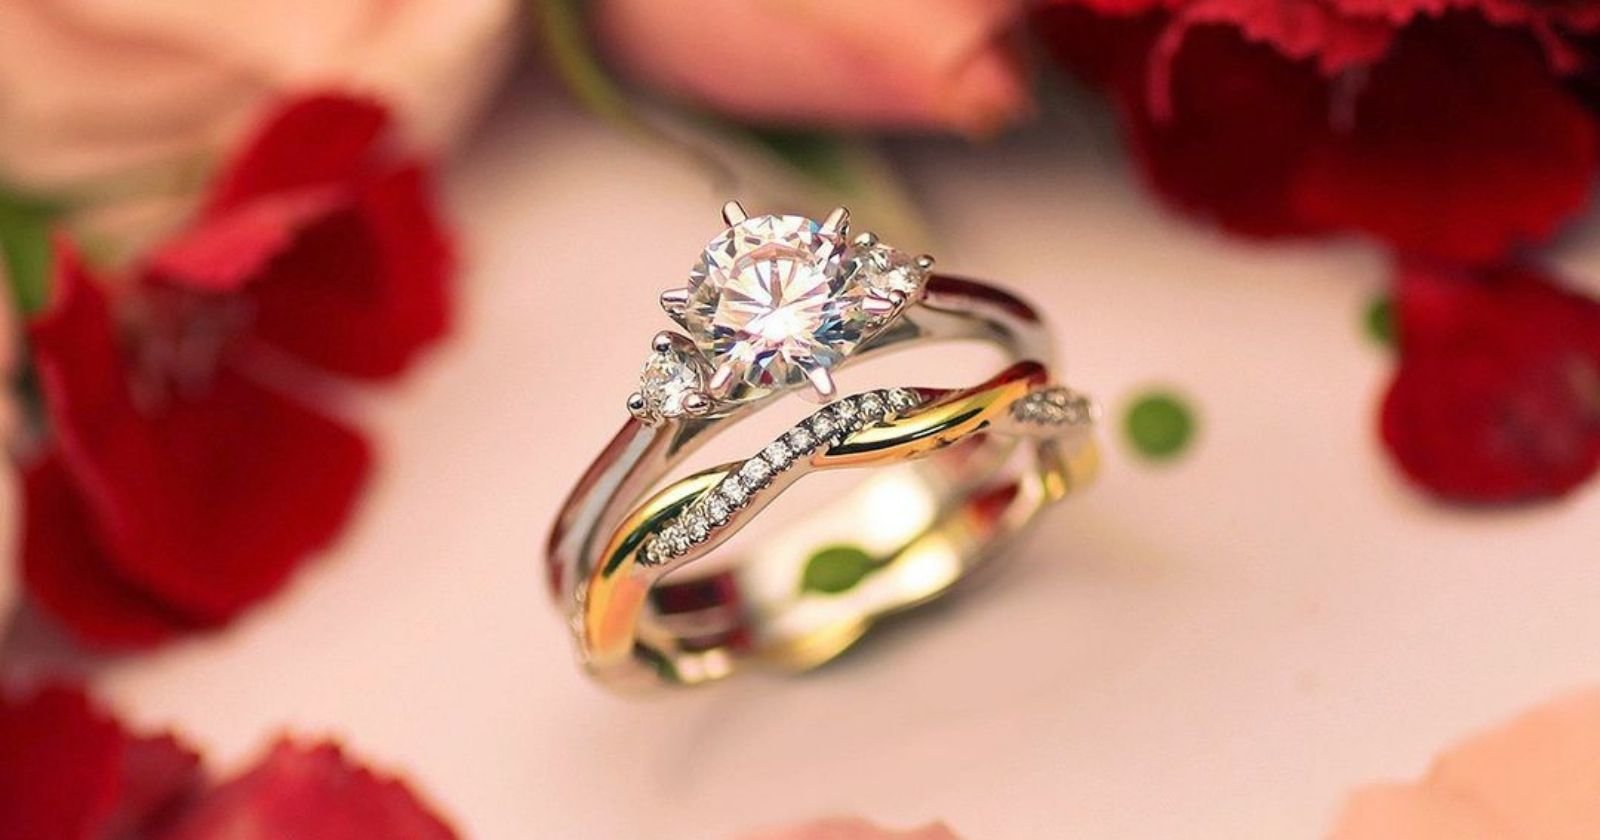 Bridal Sets: Stunning Ring Ideas That Will Melt Her Heart